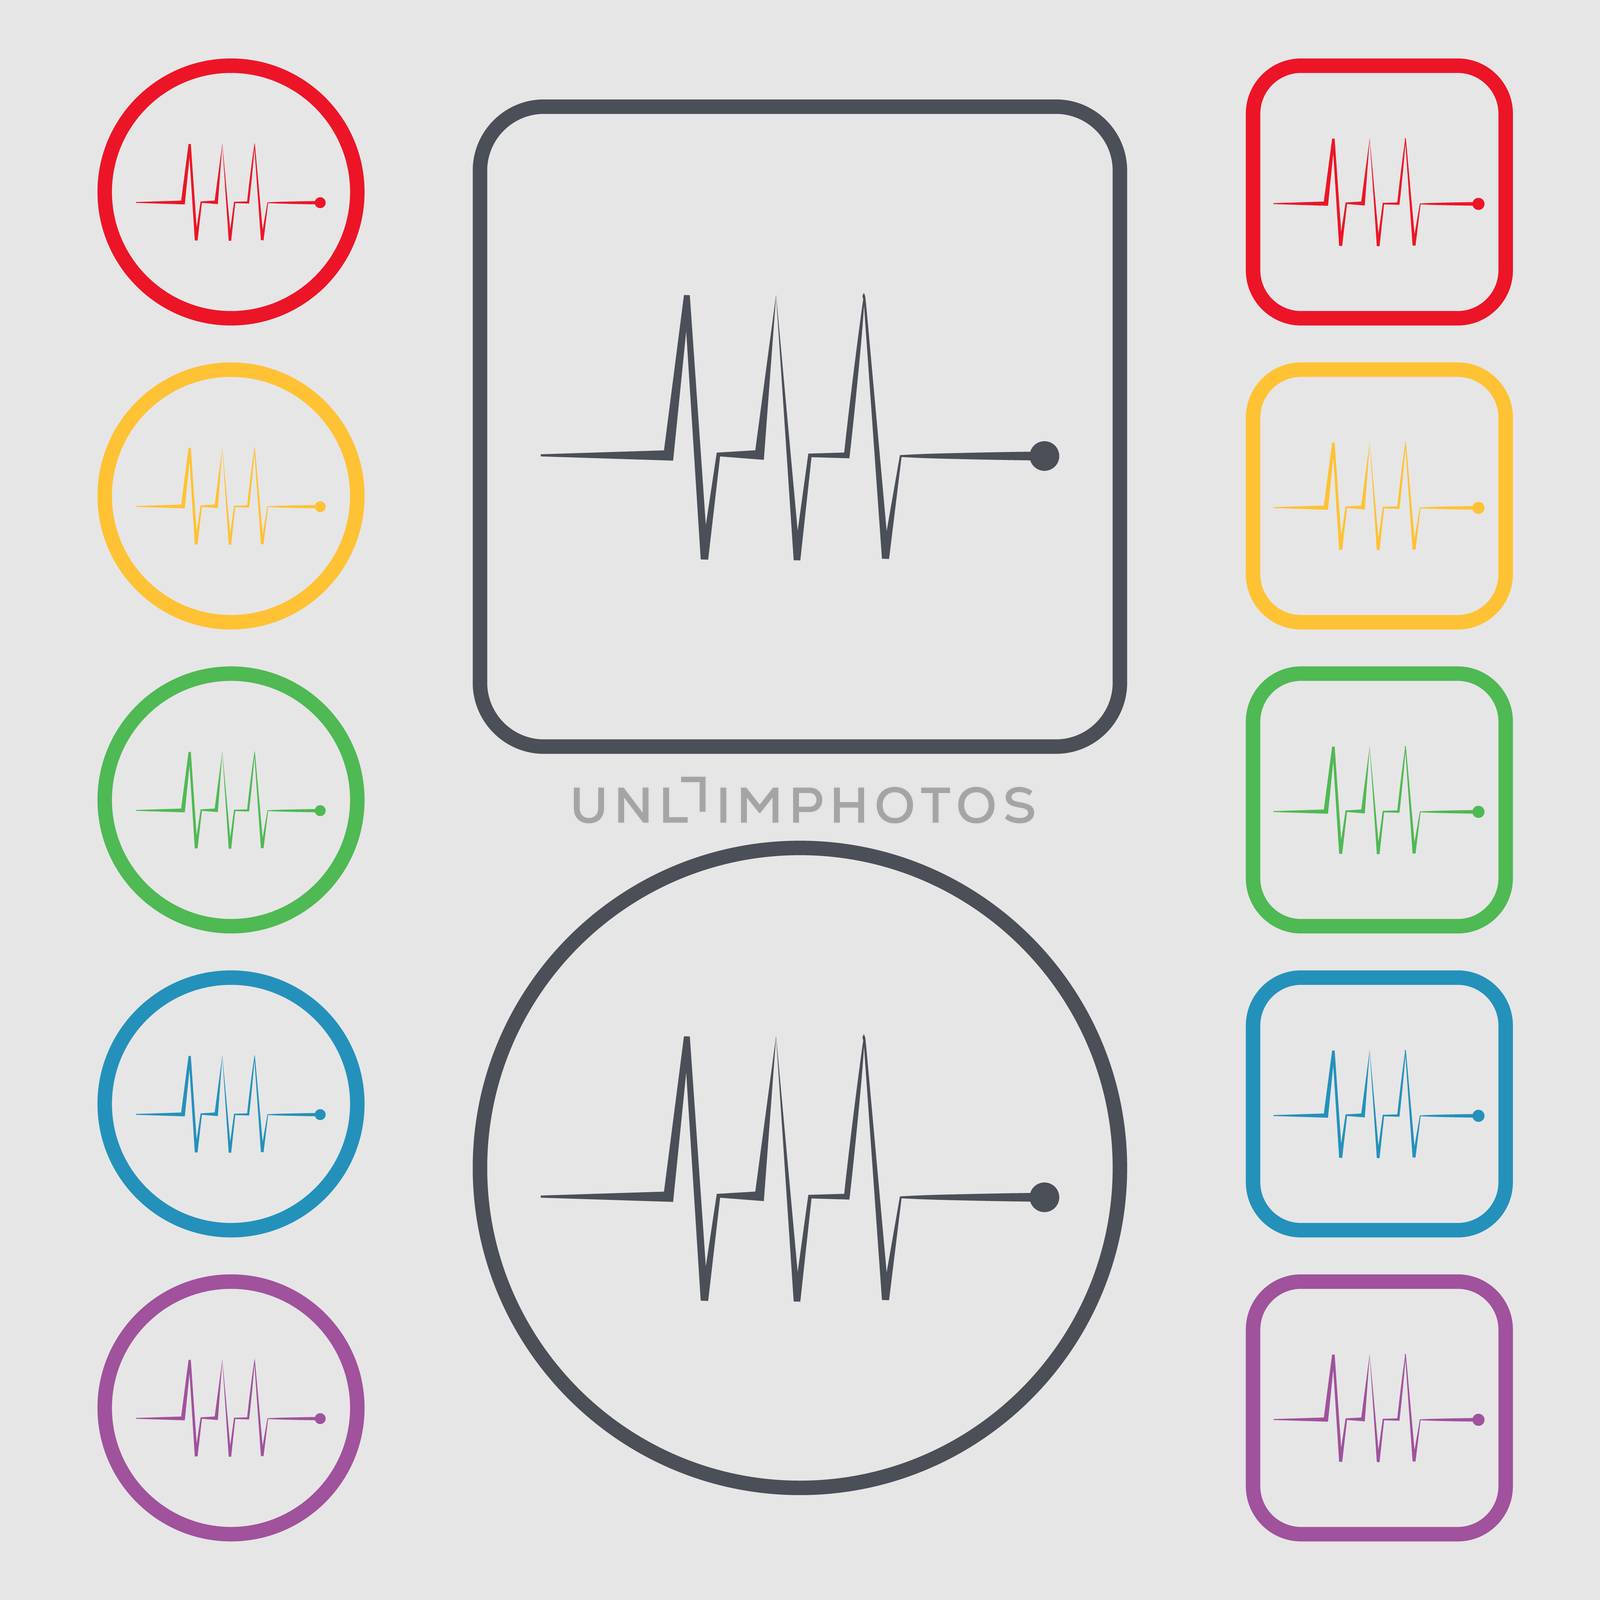 Cardiogram monitoring sign icon. Heart beats symbol. Symbols on the Round and square buttons with frame. illustration